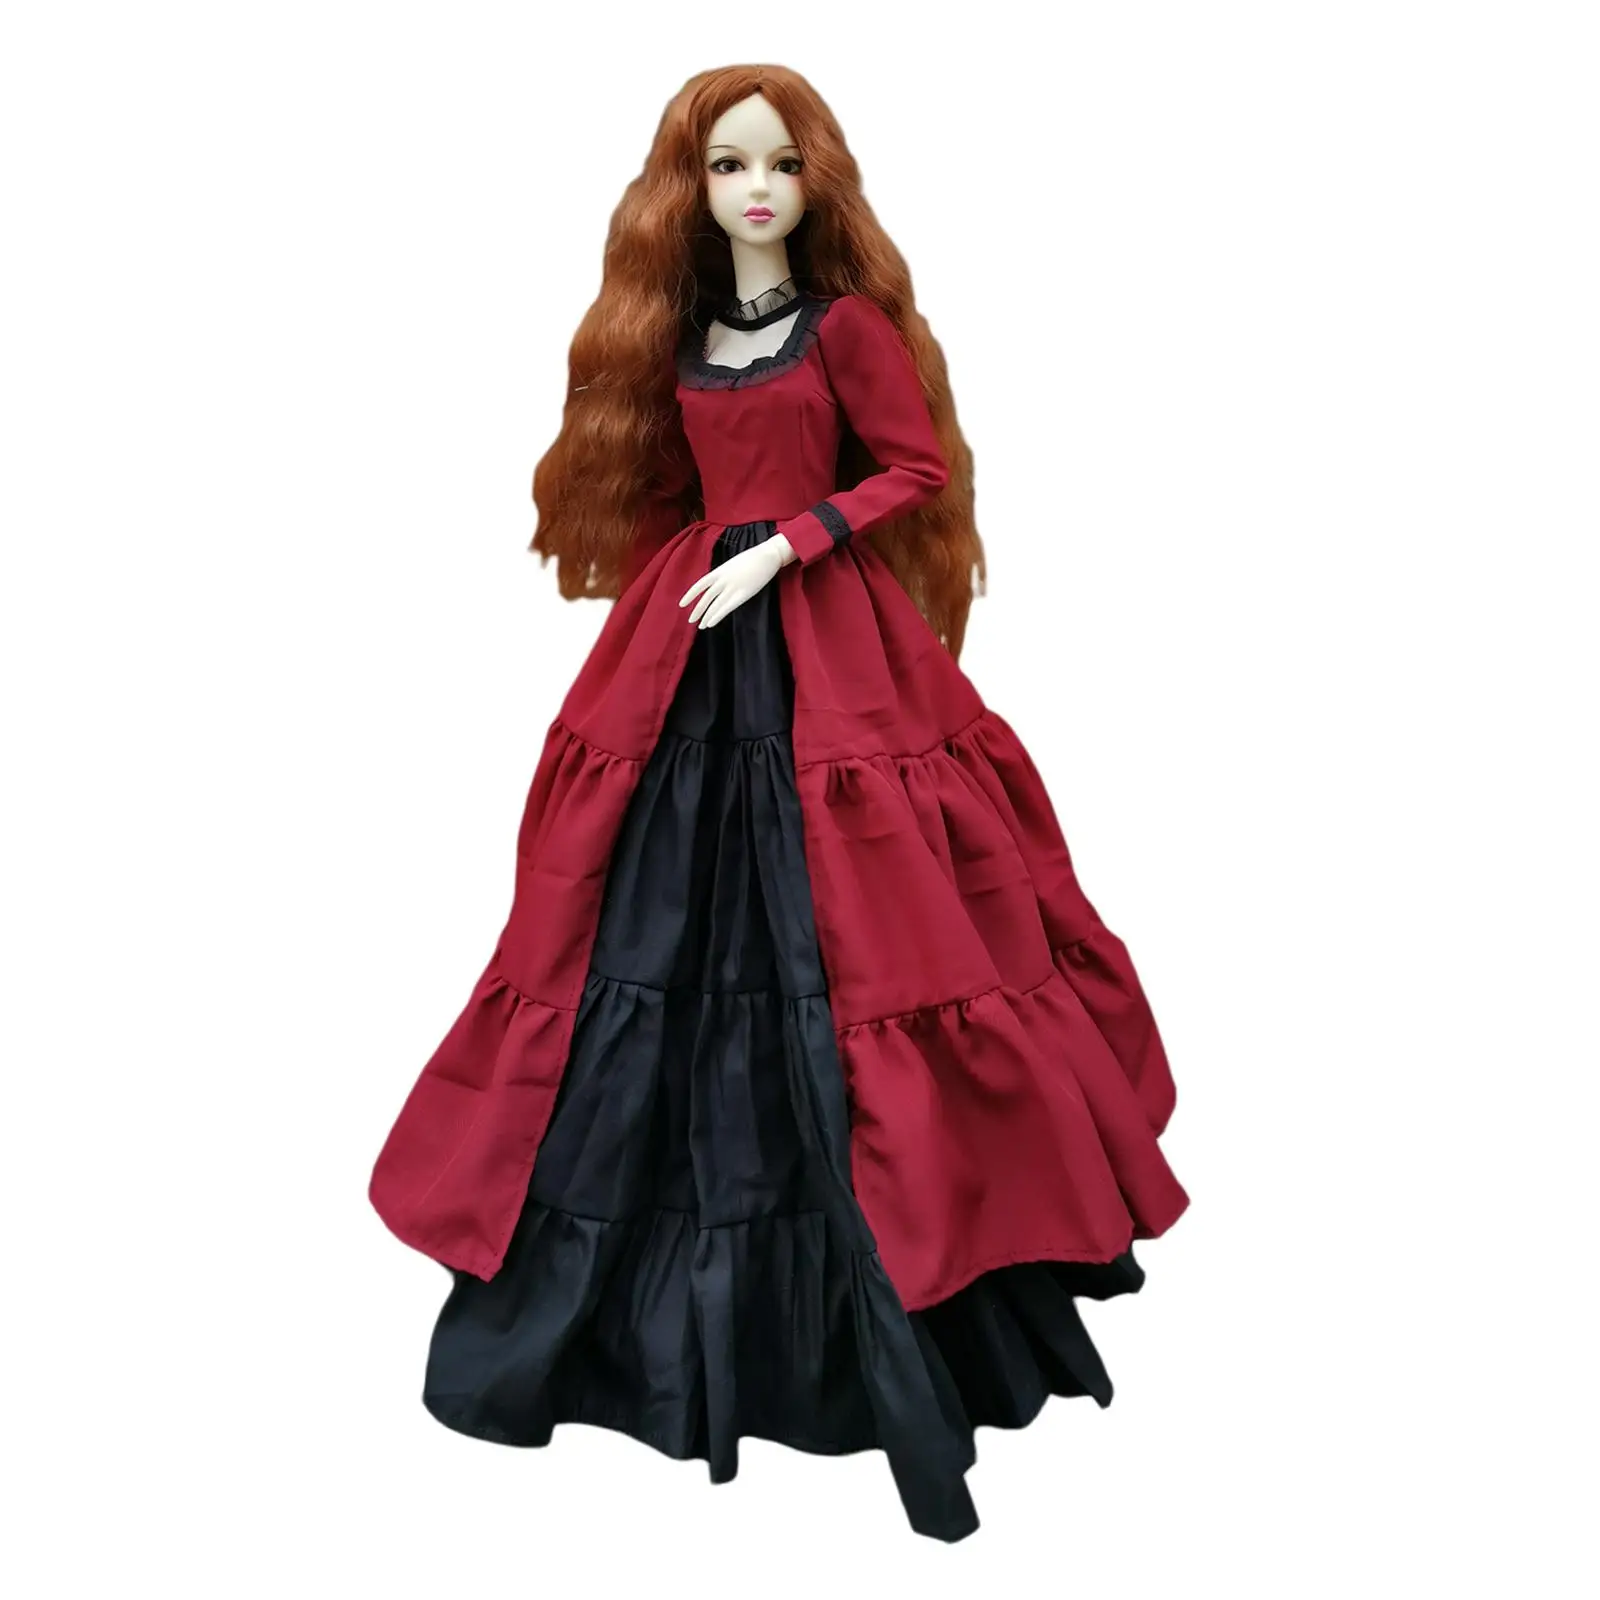 Ball Jointed Doll 1/3 Dolls with Red Dress Rotatable Joints Easy to Pose Princess Doll Action Figures 60 cm Doll for Children